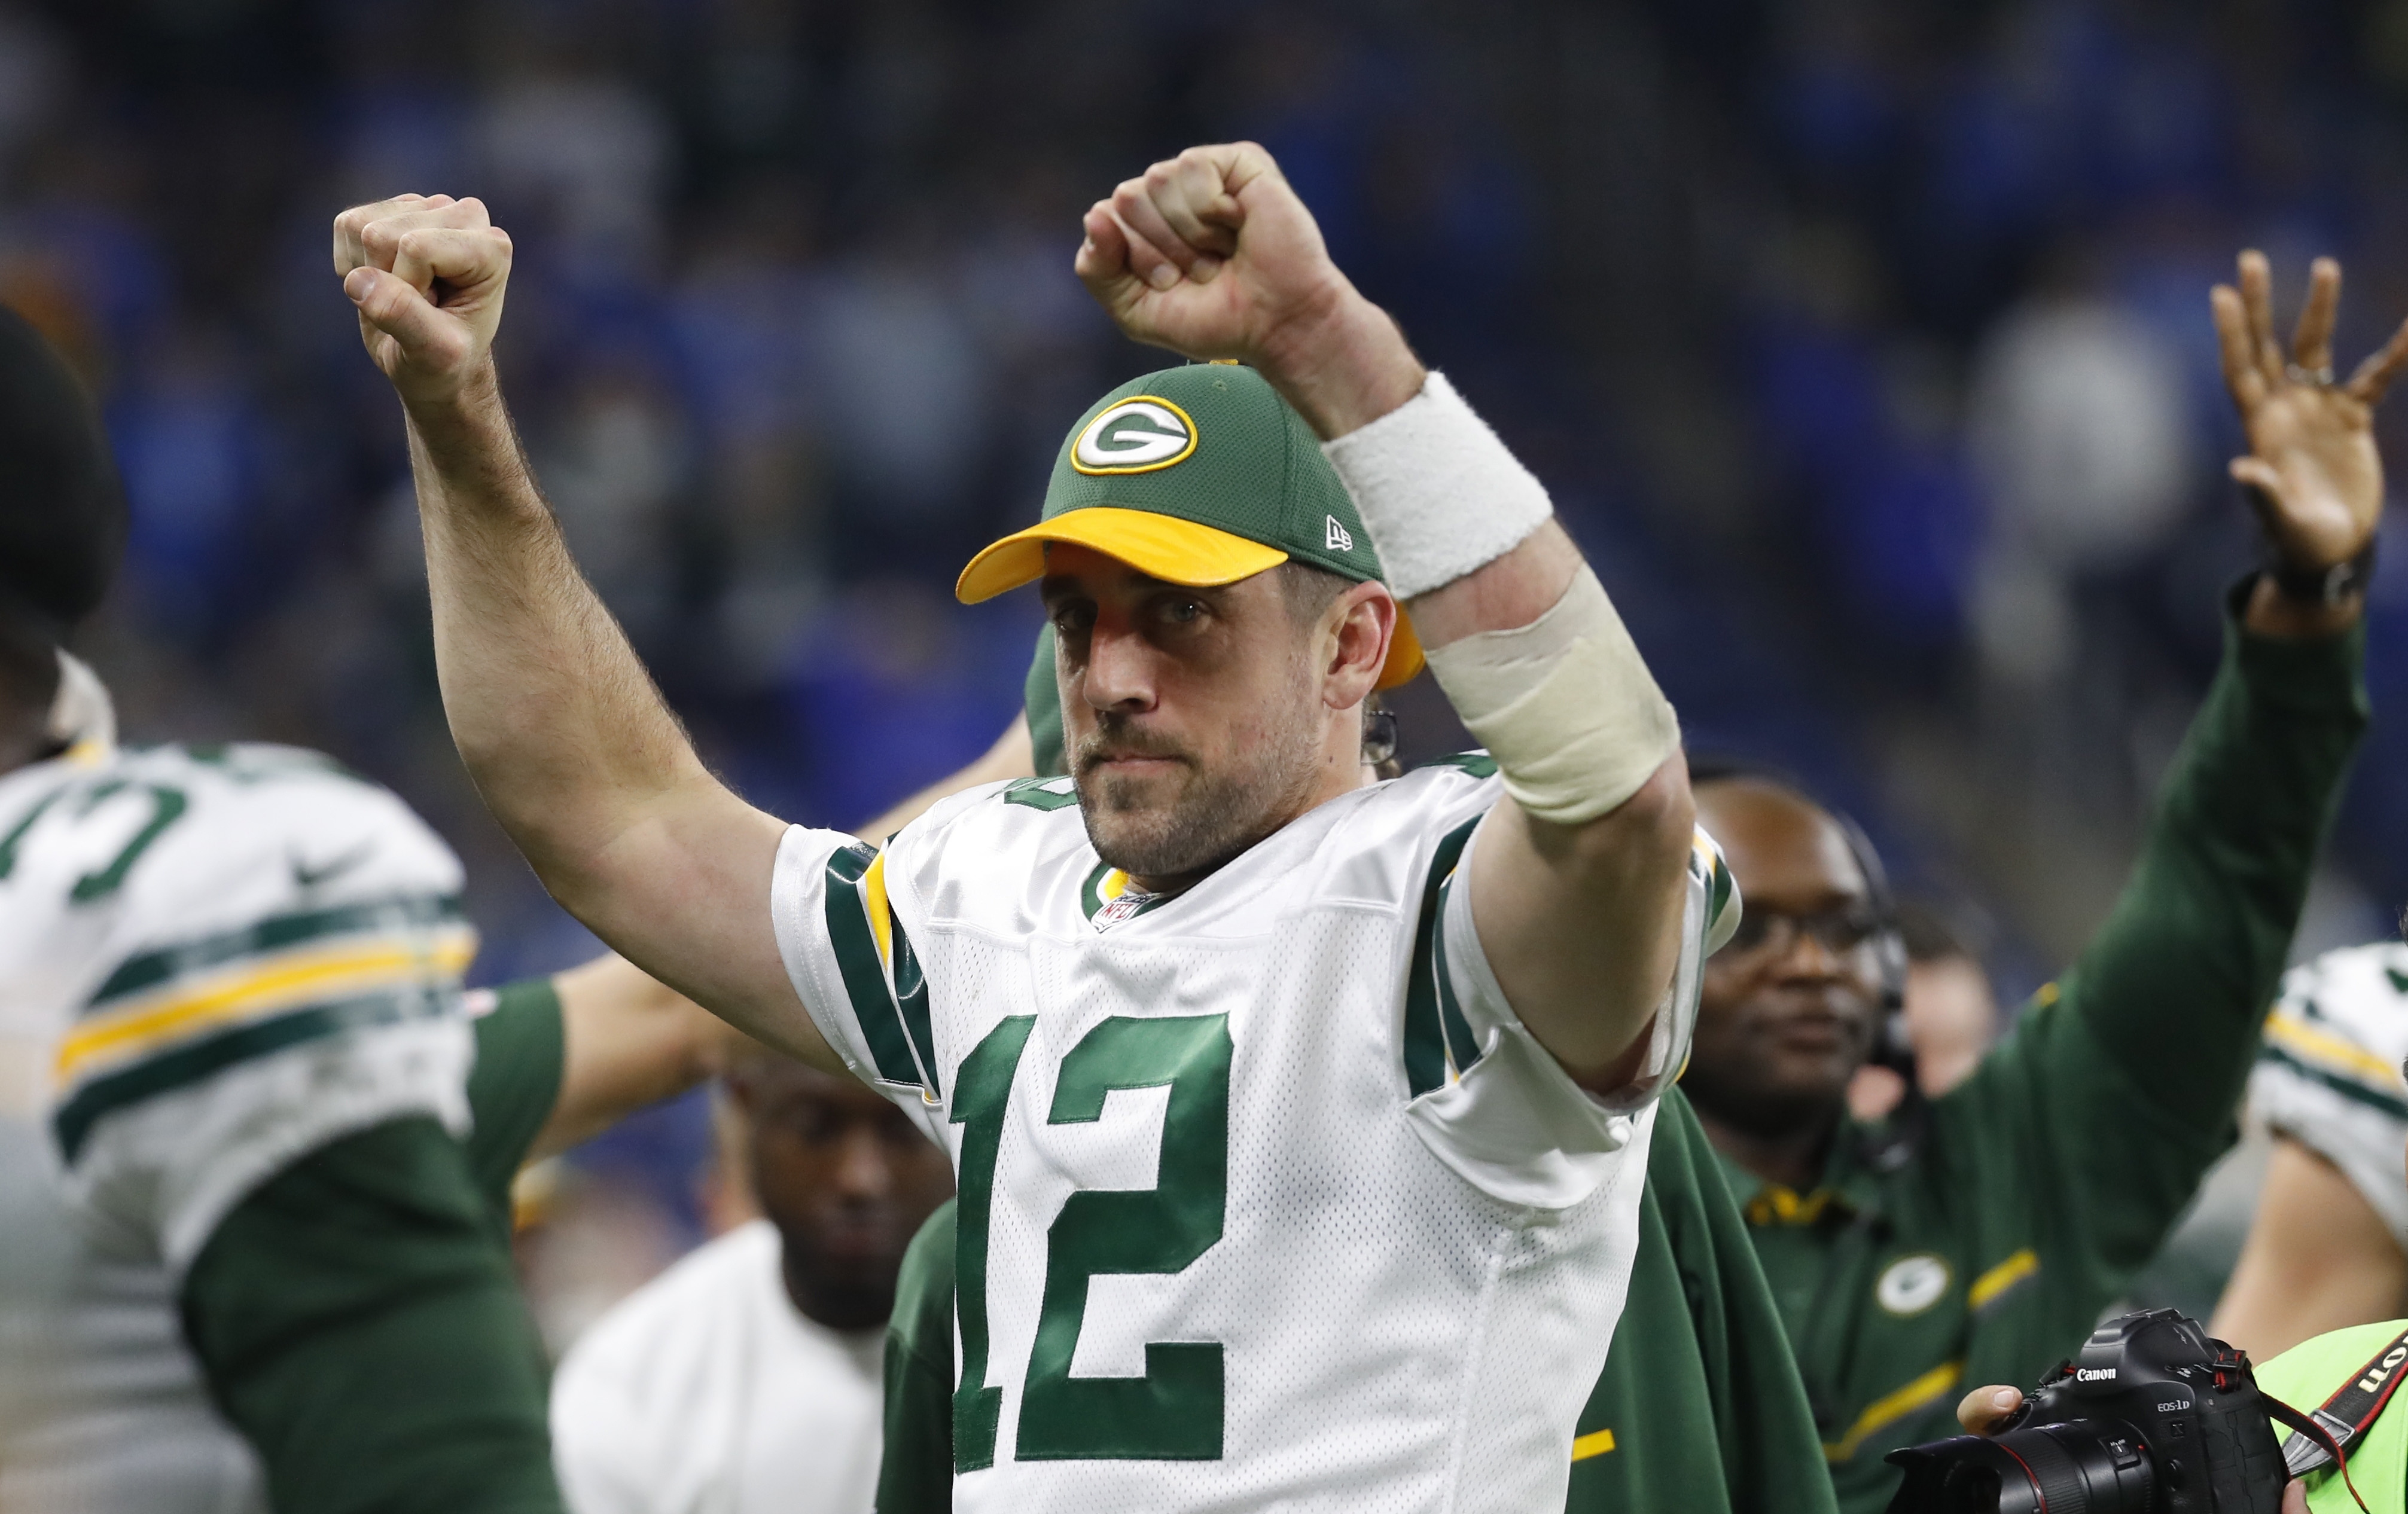 Green Bay Packers quarterback Aaron Rodgers reacts on the bench after an NFL football game against the Detroit Lions, Sunday, Jan. 1, 2017, in Detroit. The Packers defeated the Lions 31-24.